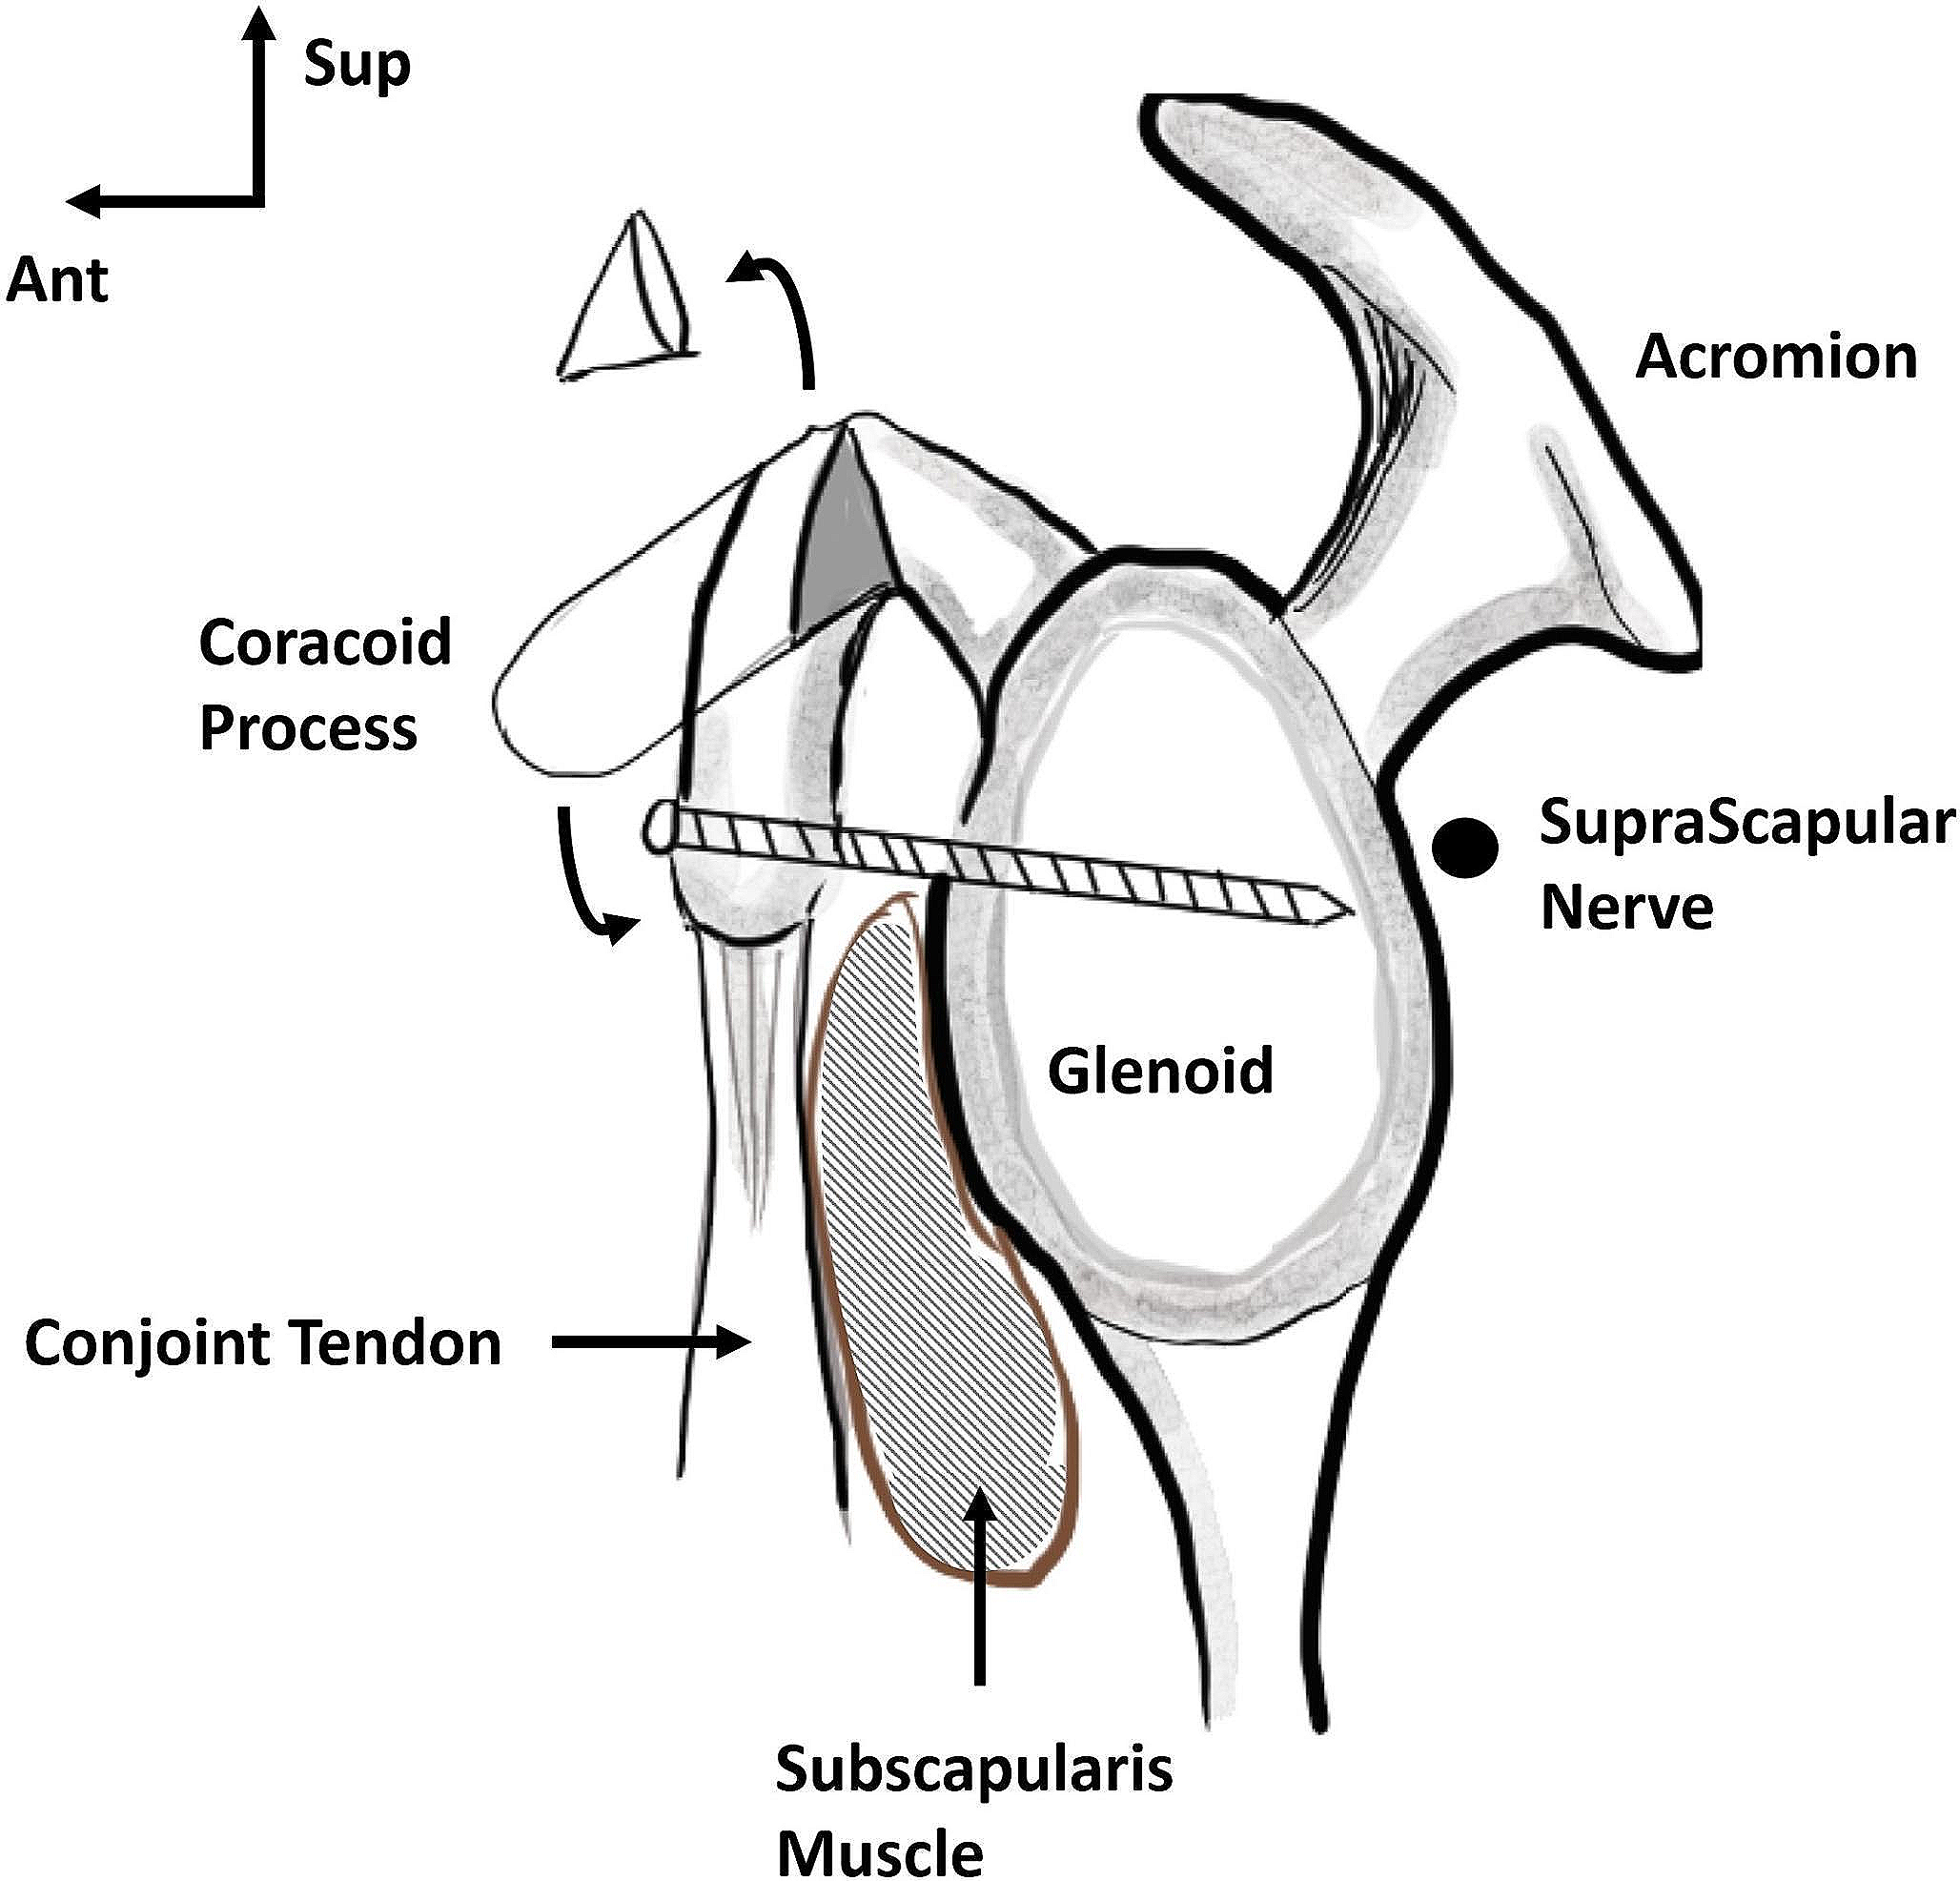 Risk of suprascapular nerve injury in open Trillat procedure: an anatomical study